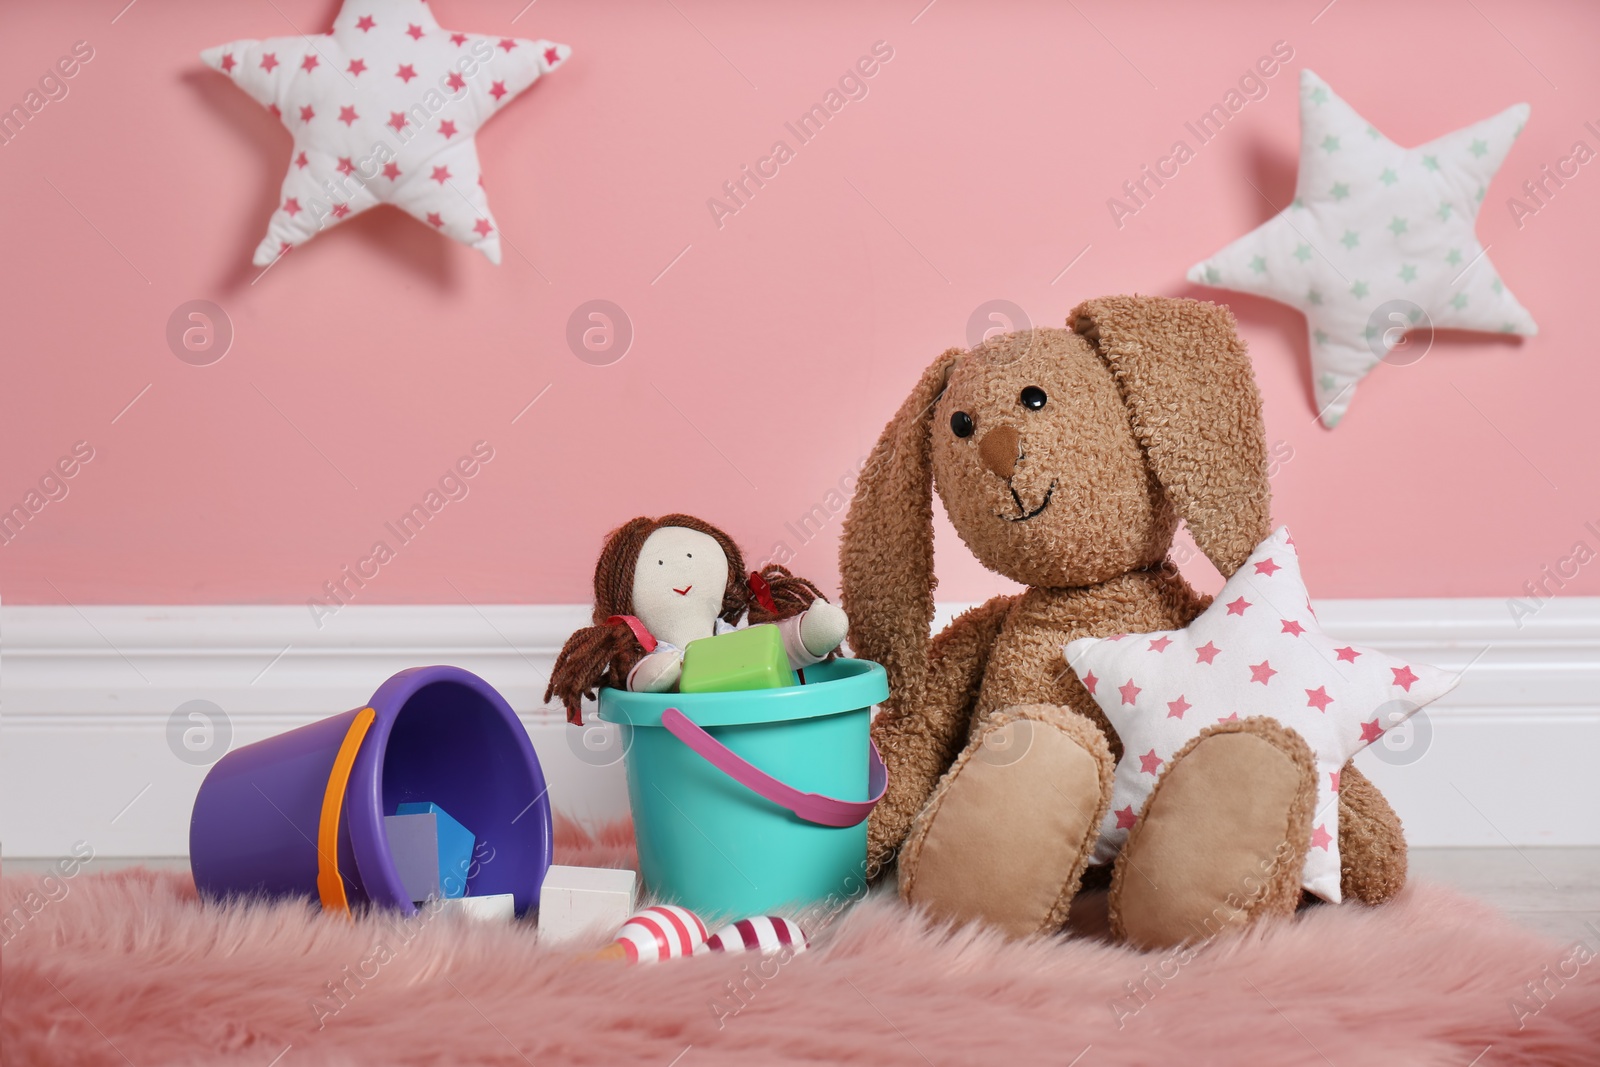 Photo of Set of different child toys on floor against color wall